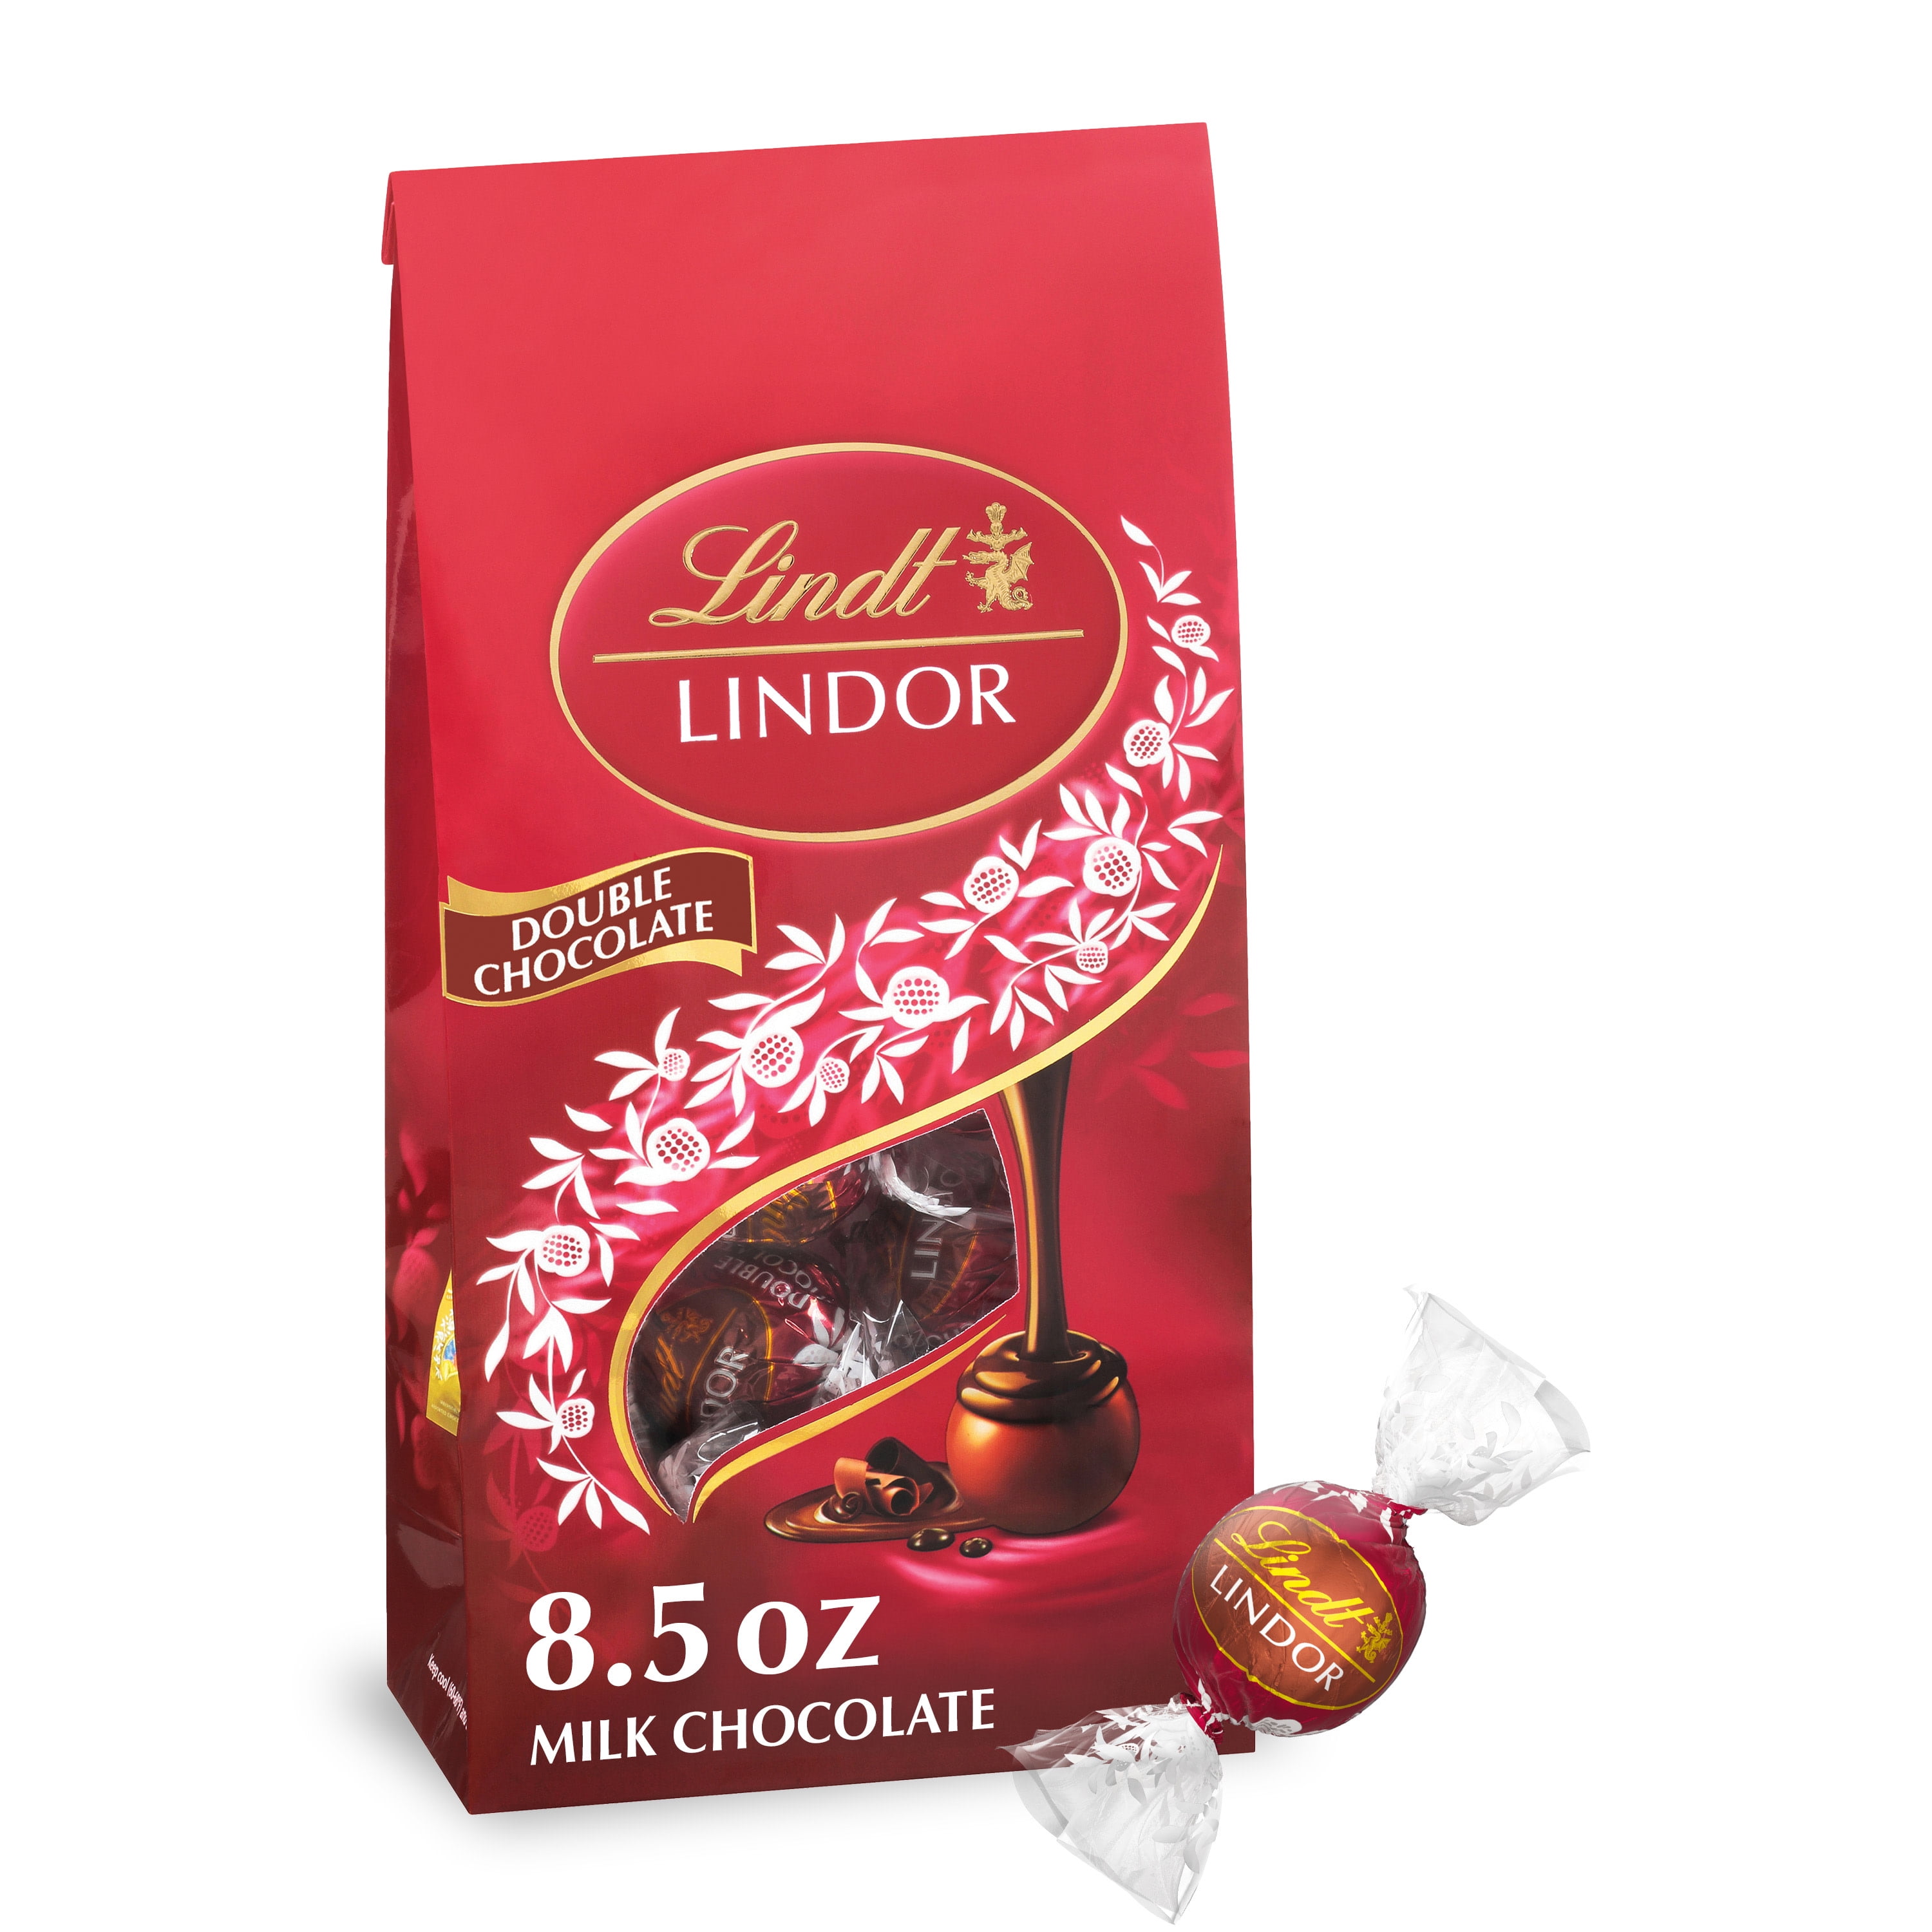 Lindt LINDOR 70% Extra Dark Chocolate Truffles, Dark Chocolate Candy with  Smooth, Melting Truffle Center, Great for gift giving, 5.1 Ounce (Pack of 6)